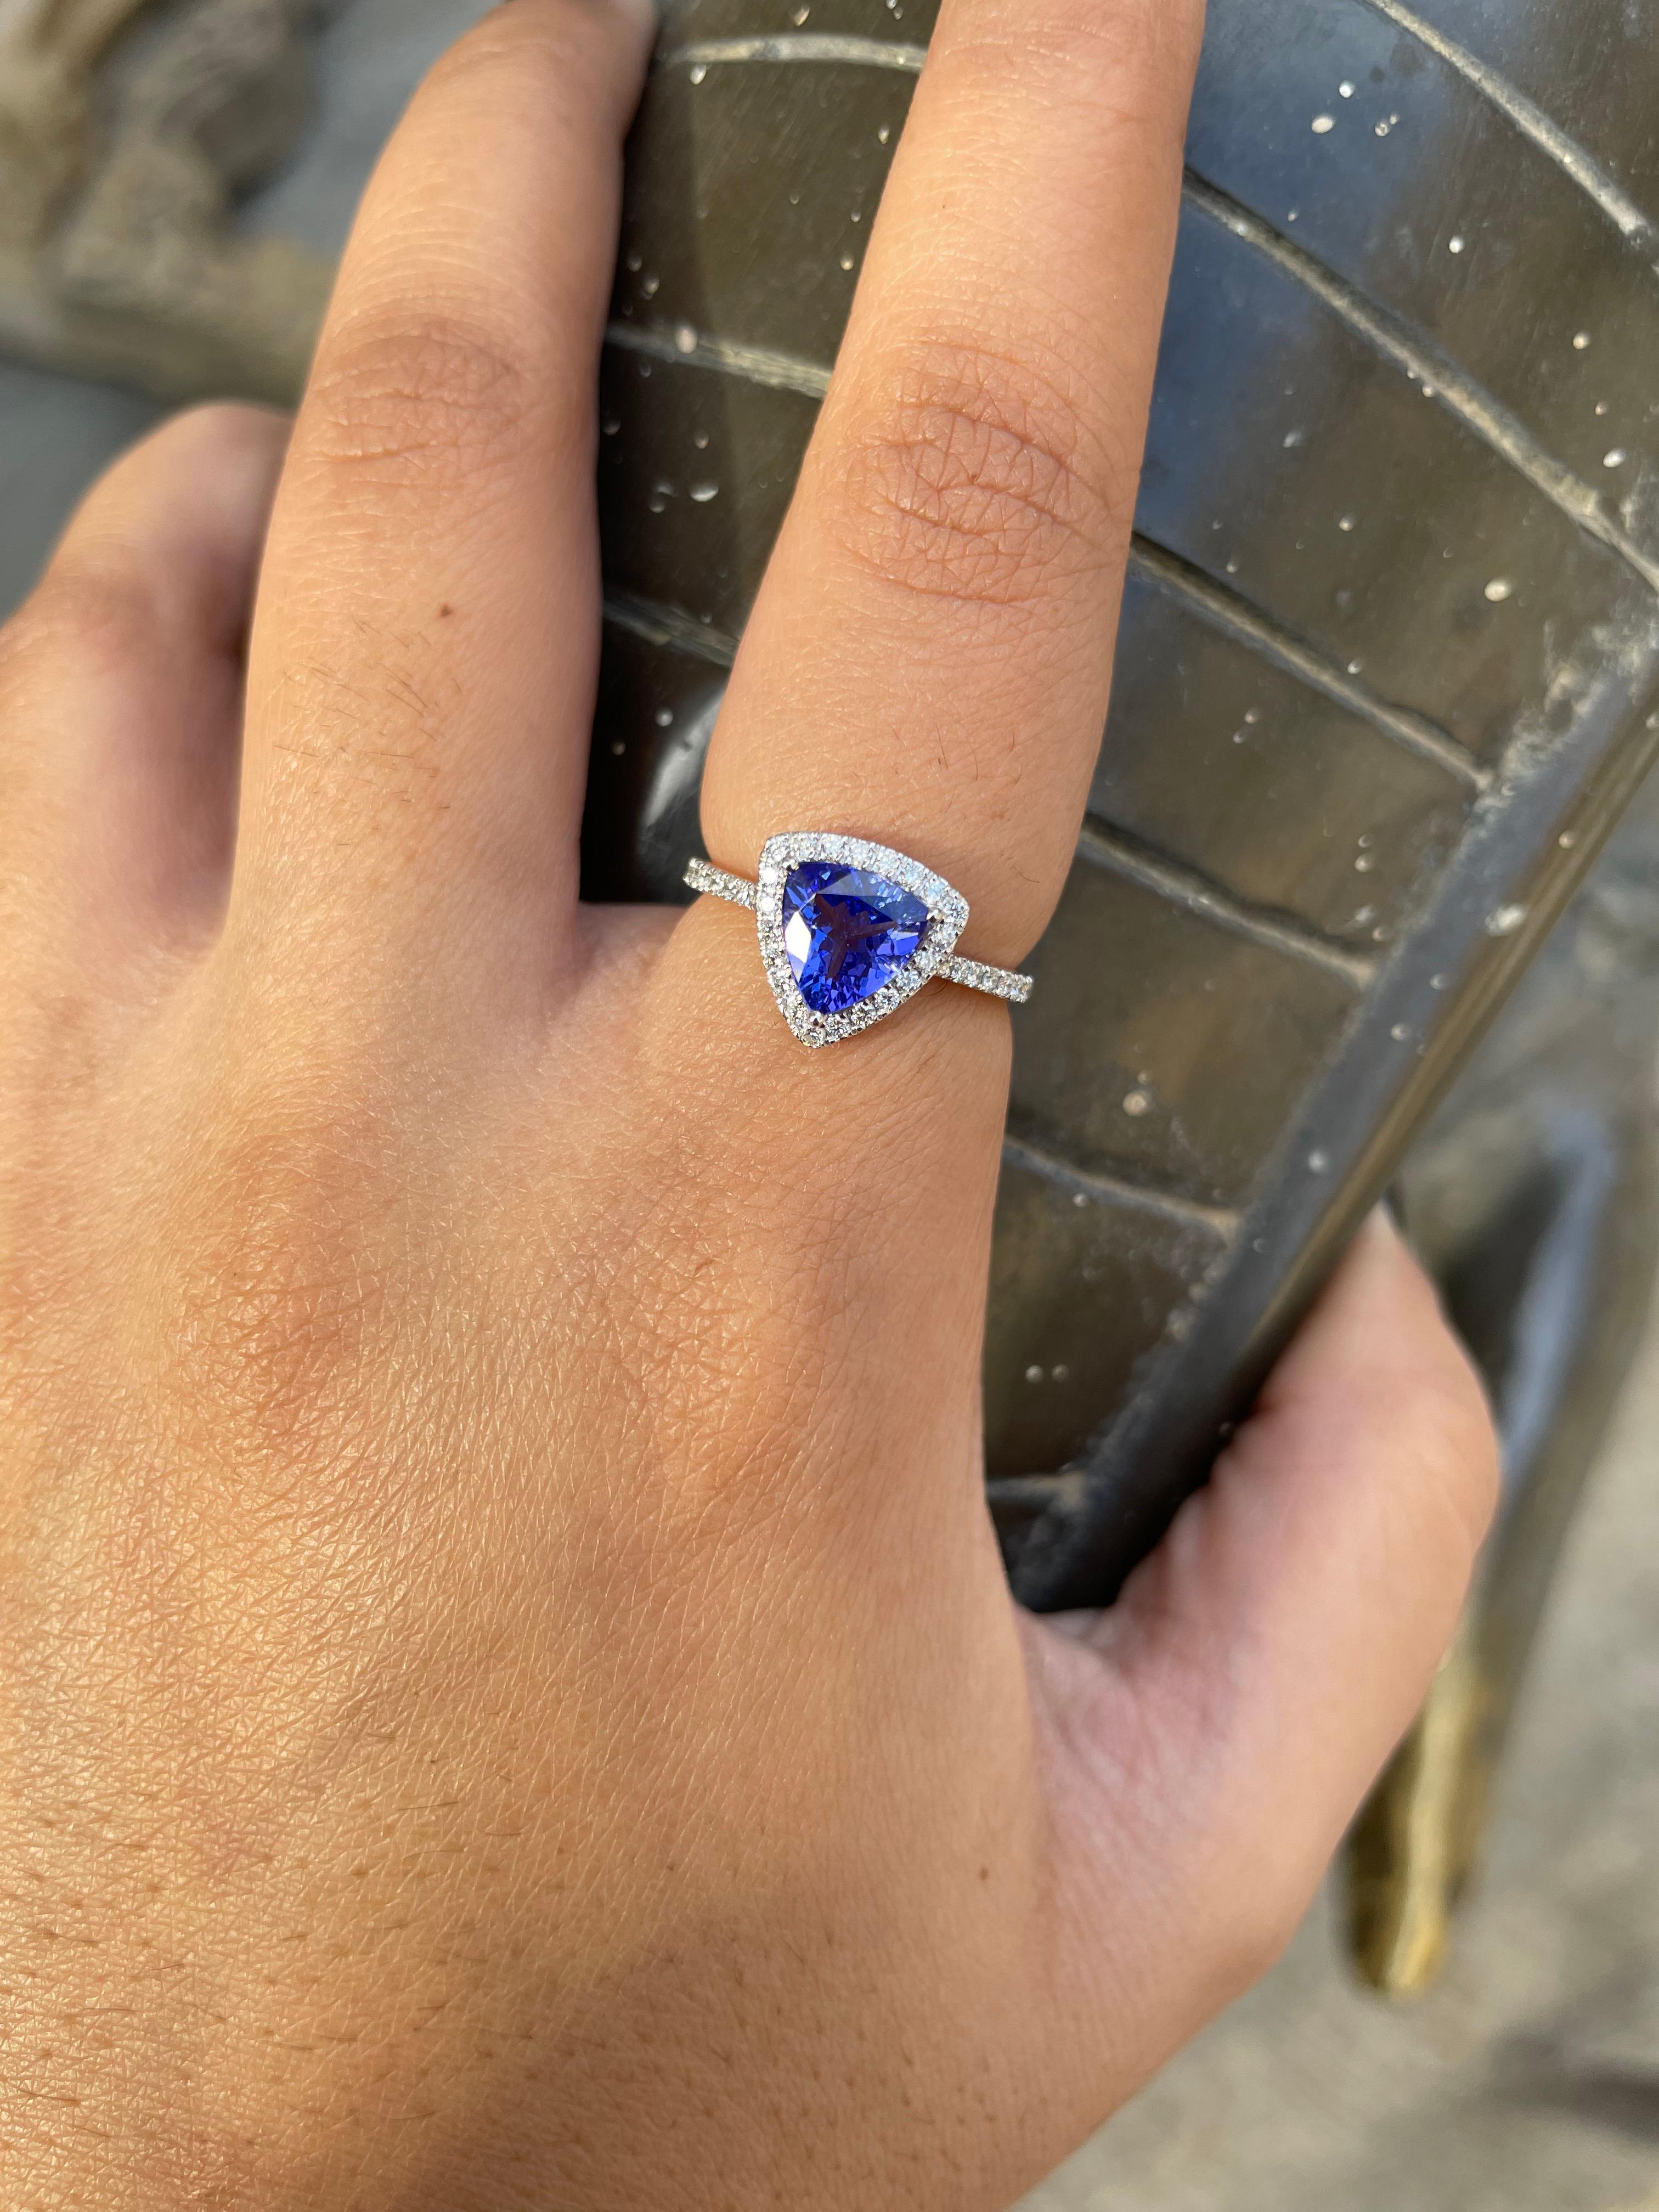 For Sale:  Natural Tanzanite Diamond Engagement Ring in 18k Solid White Gold 7